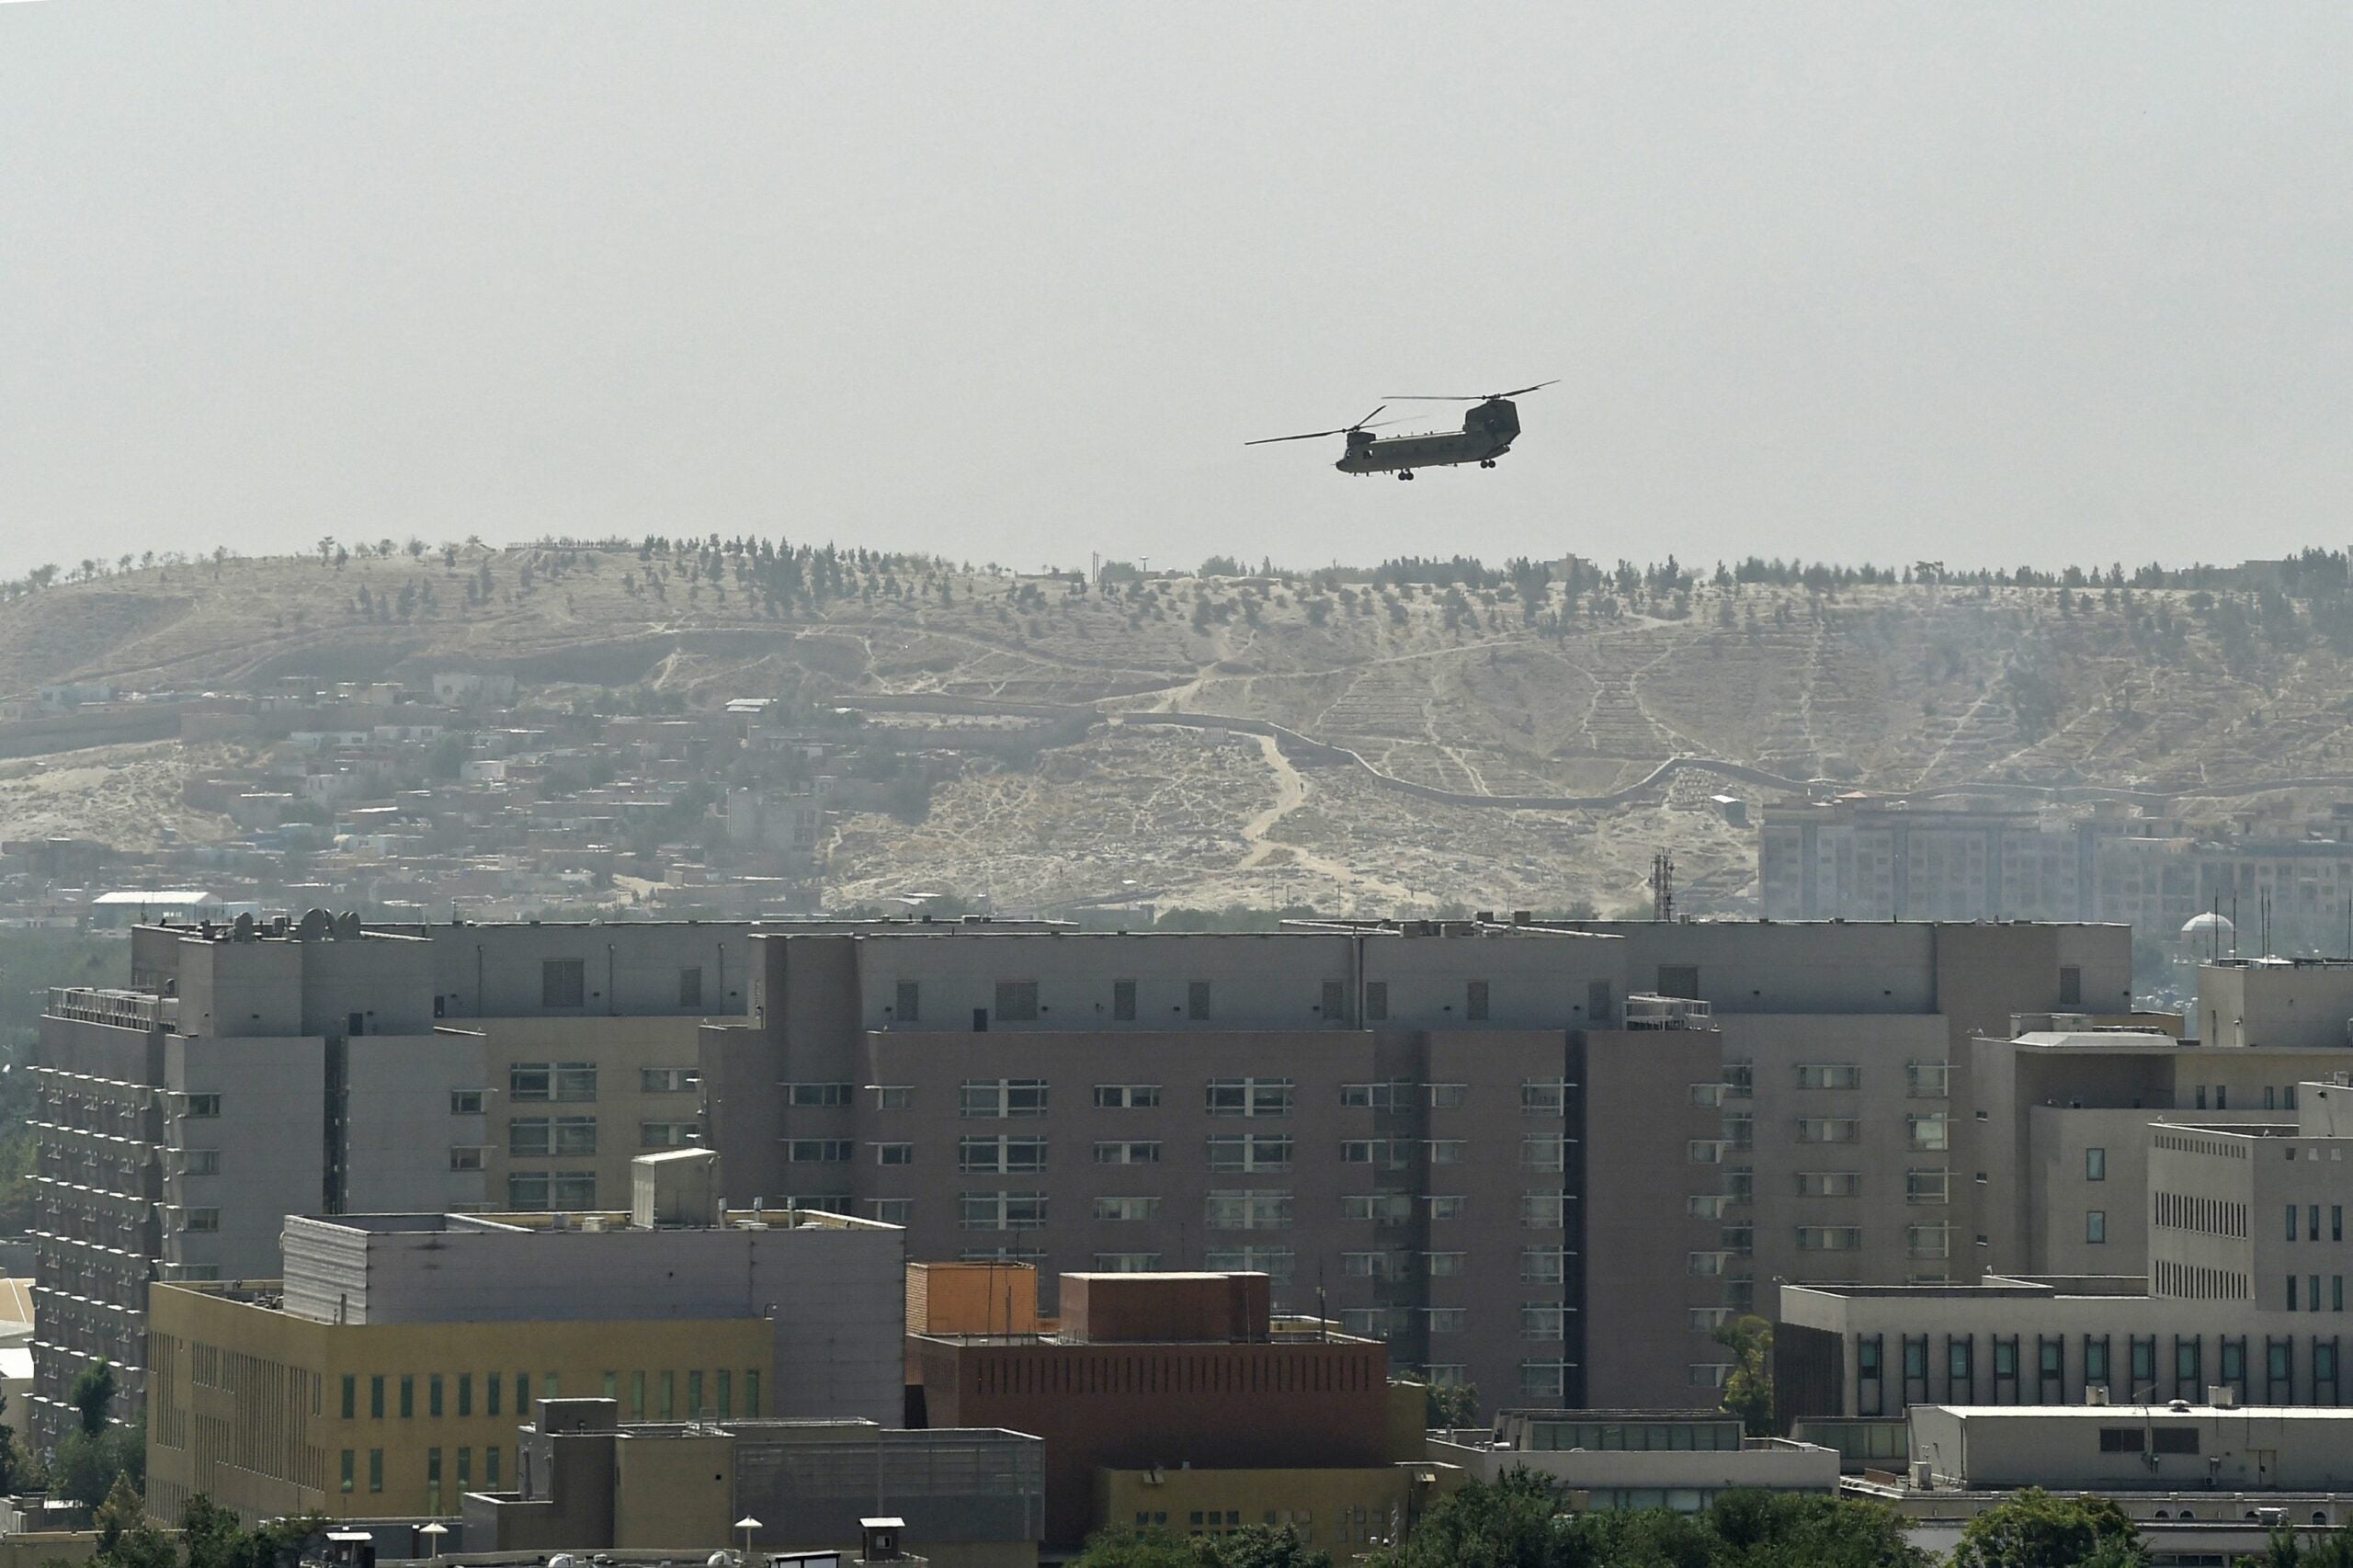 TOPSHOT - A U.S. Chinook military helicopter flies above the US embassy in Kabul on August 15, 2021. Several hundred employees of the US embassy in Kabul have been evacuated from Afghanistan, a US defense official said on August 15, 2021, as the Taliban entered the capital. (Photo by Wakil KOHSAR / AFP) (Photo by WAKIL KOHSAR/AFP via Getty Images)